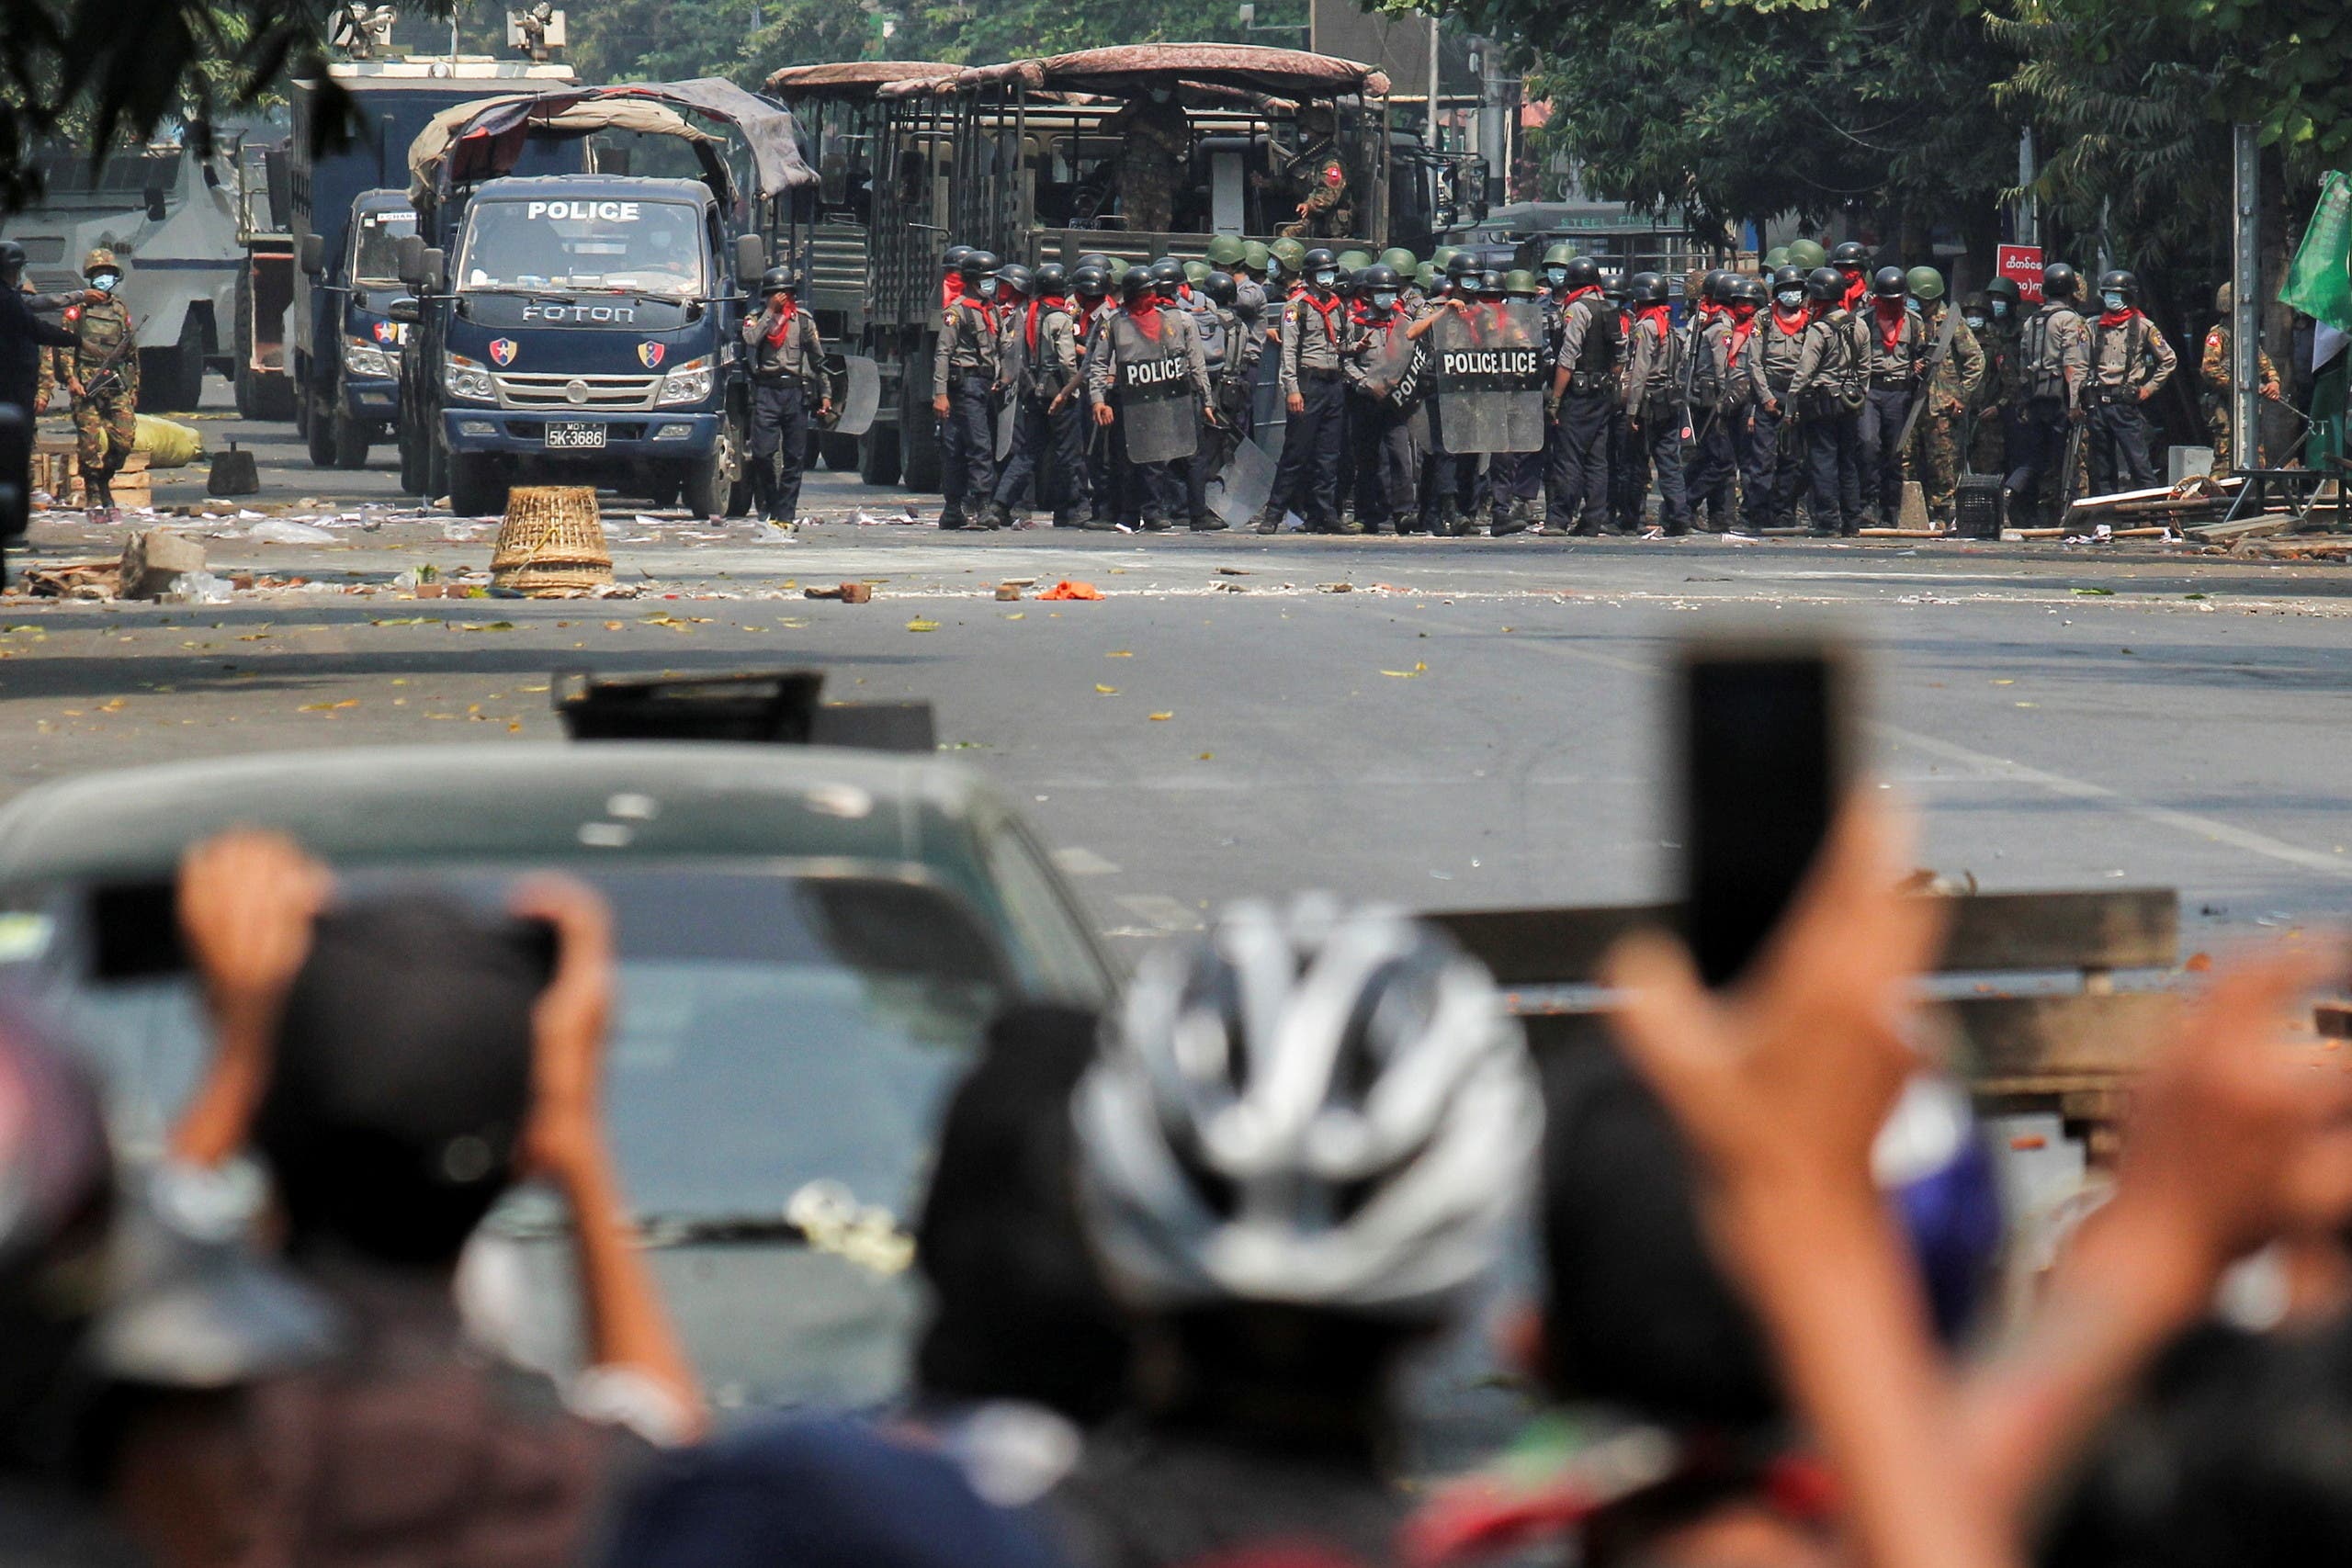 Police stand on a road during an anti-coup protest in Mandalay, Myanmar, March 3, 2021. (Reuters)